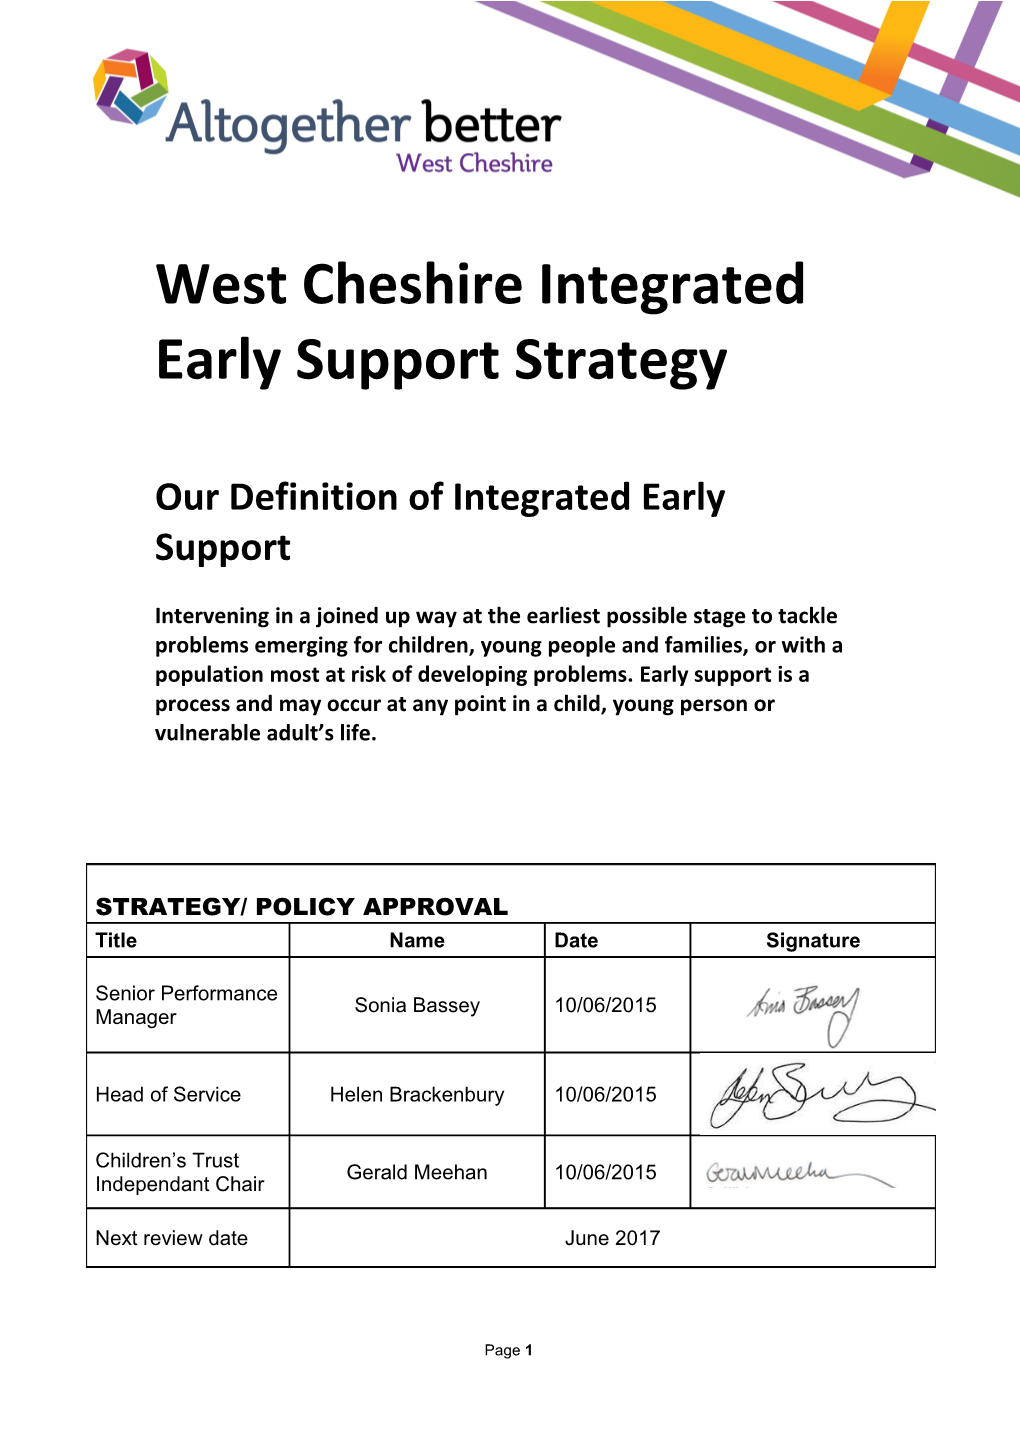 West Cheshire Integrated Early Support Strategy